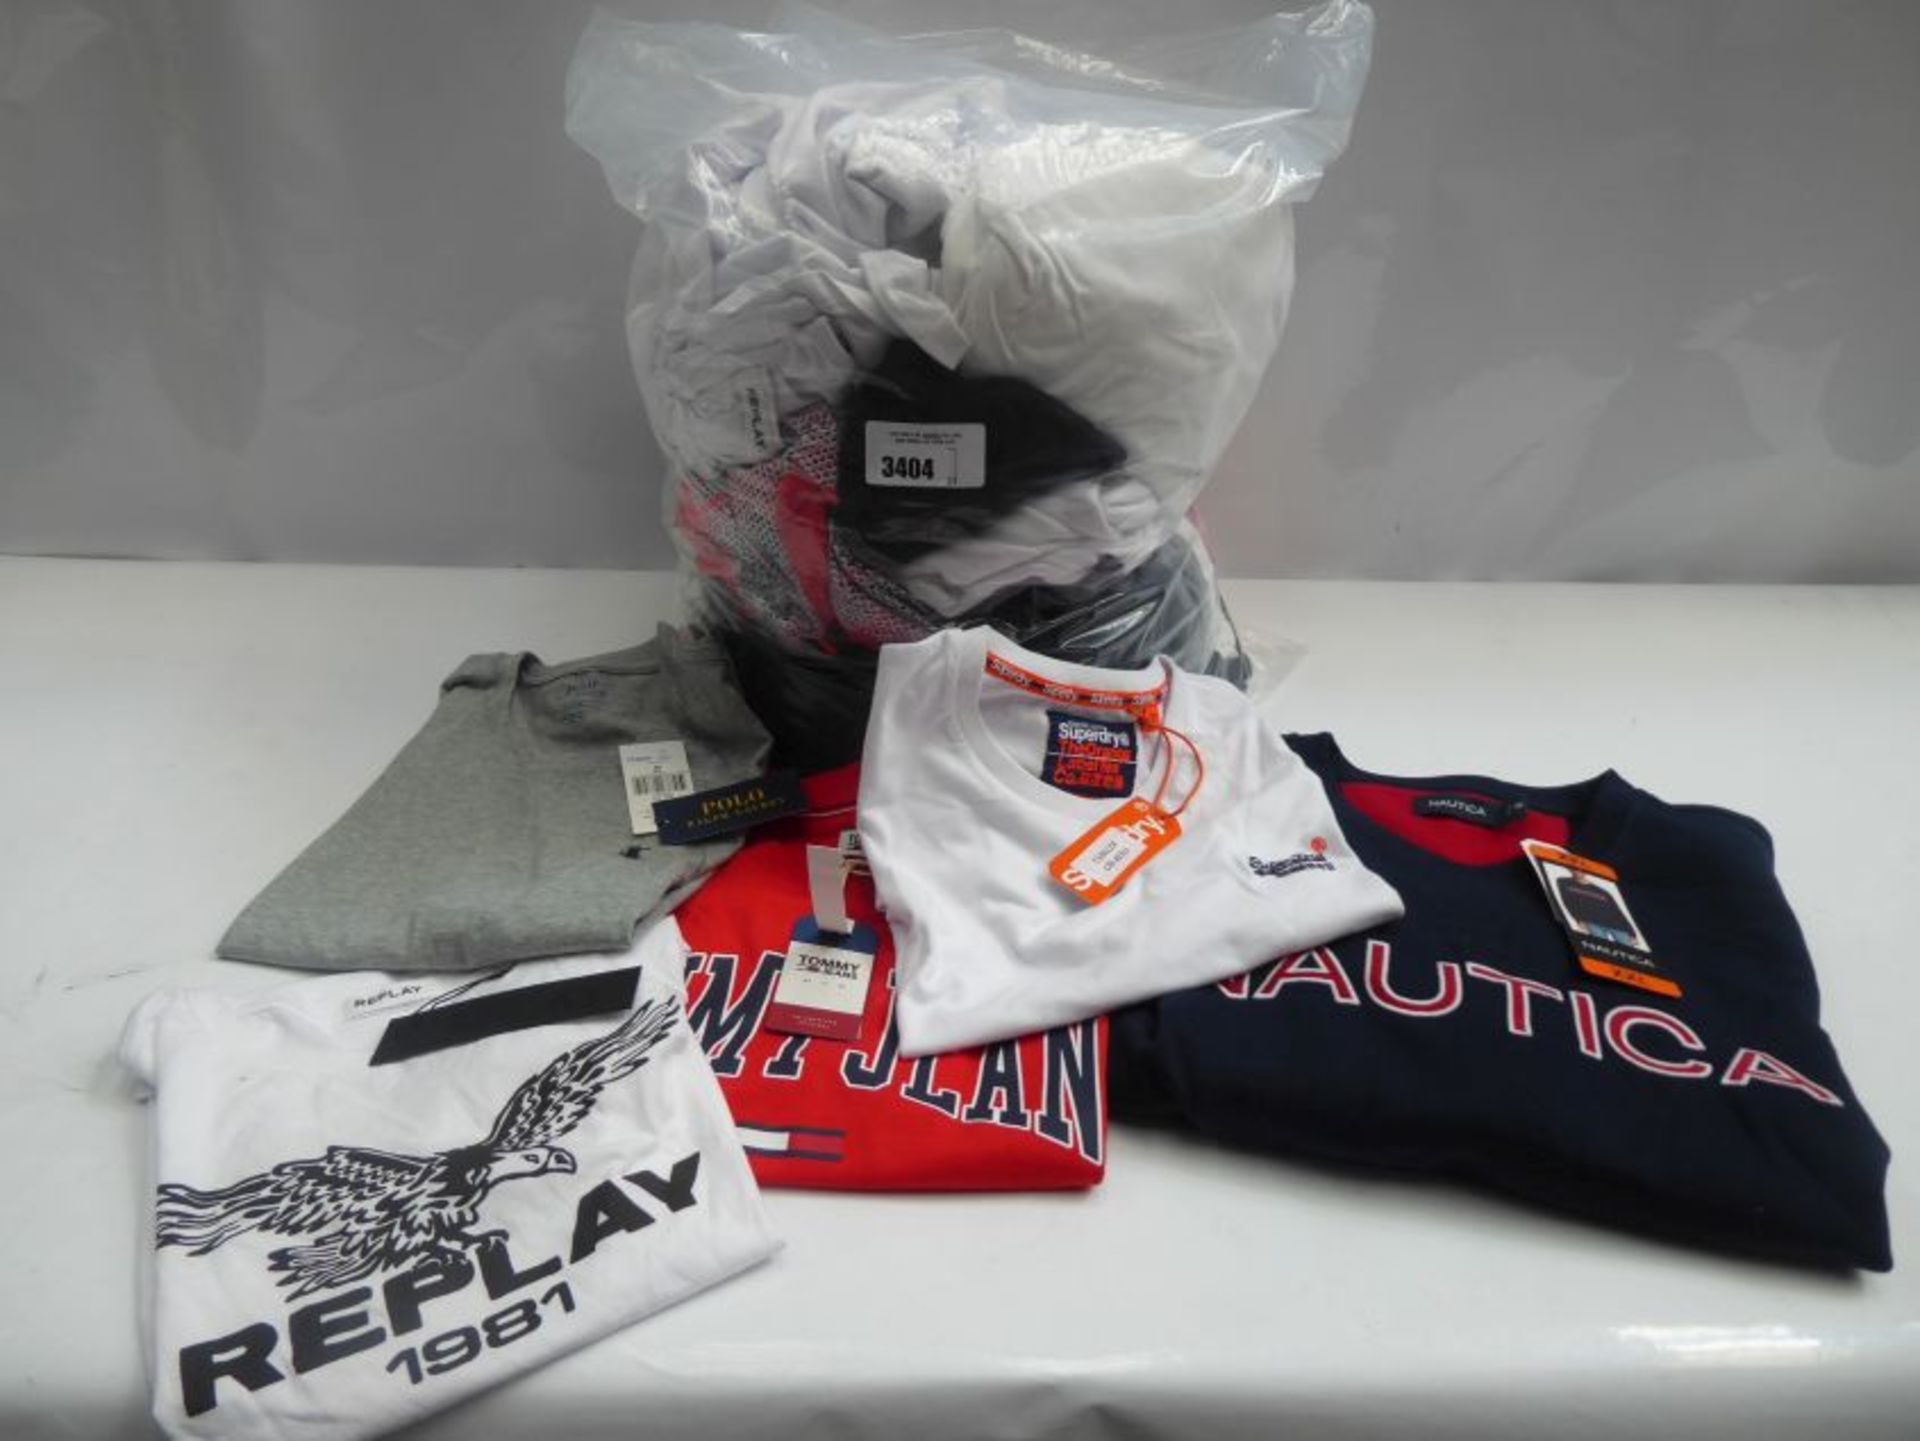 Bag containing mixed sportswear to include swimming trunks, polo shirts by Kirkland, t-shirts by